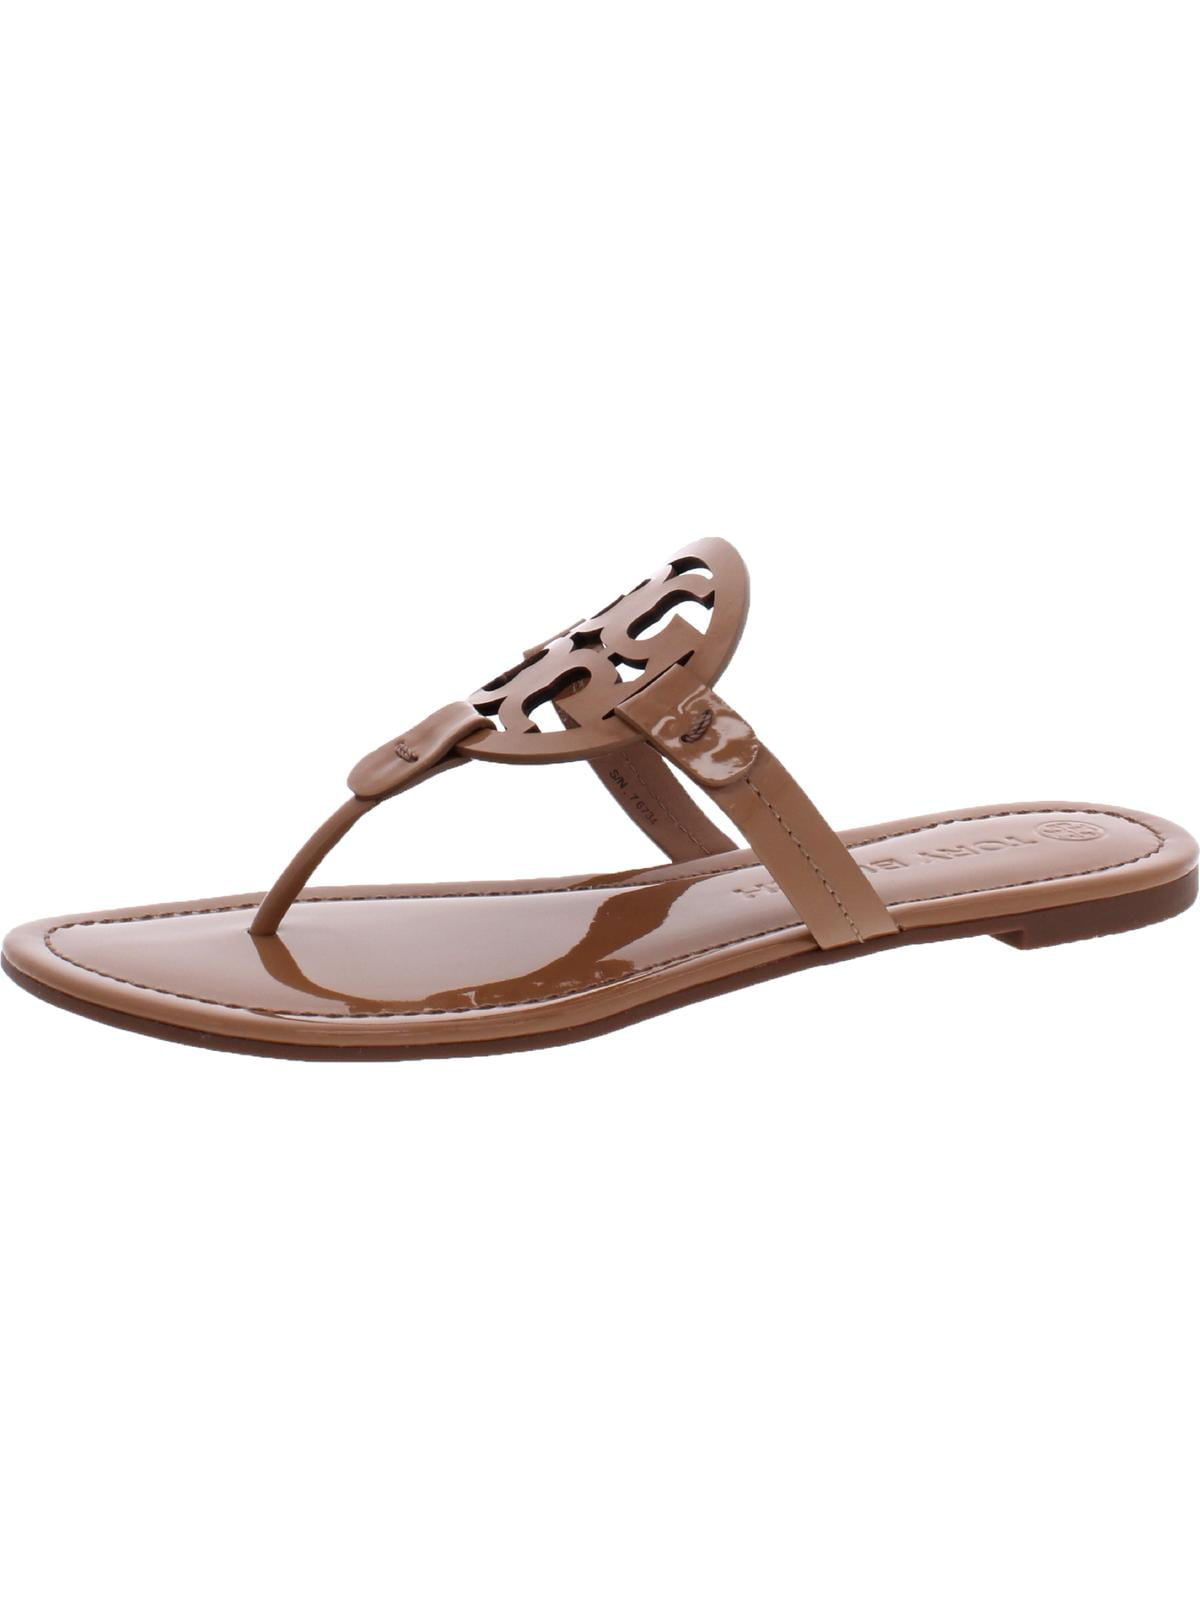 Shop Tory Burch Miller T-Strap Leather Wedge Sandals